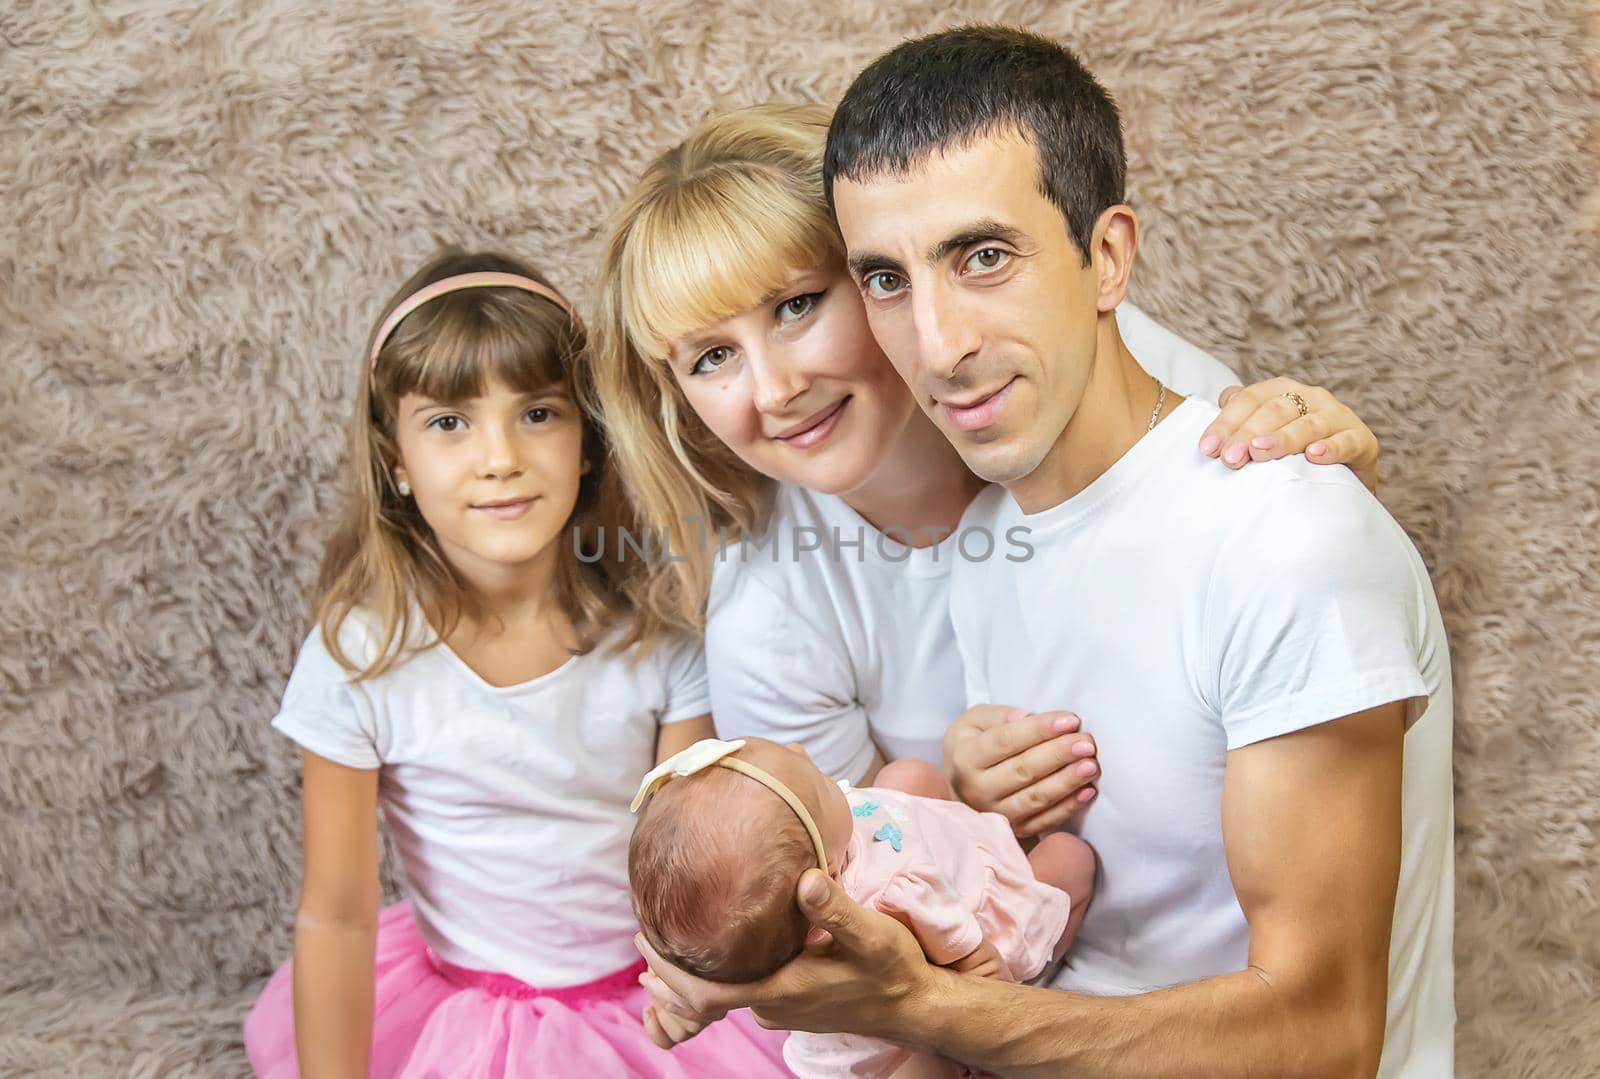 family photo with a newborn. selective focus. people.